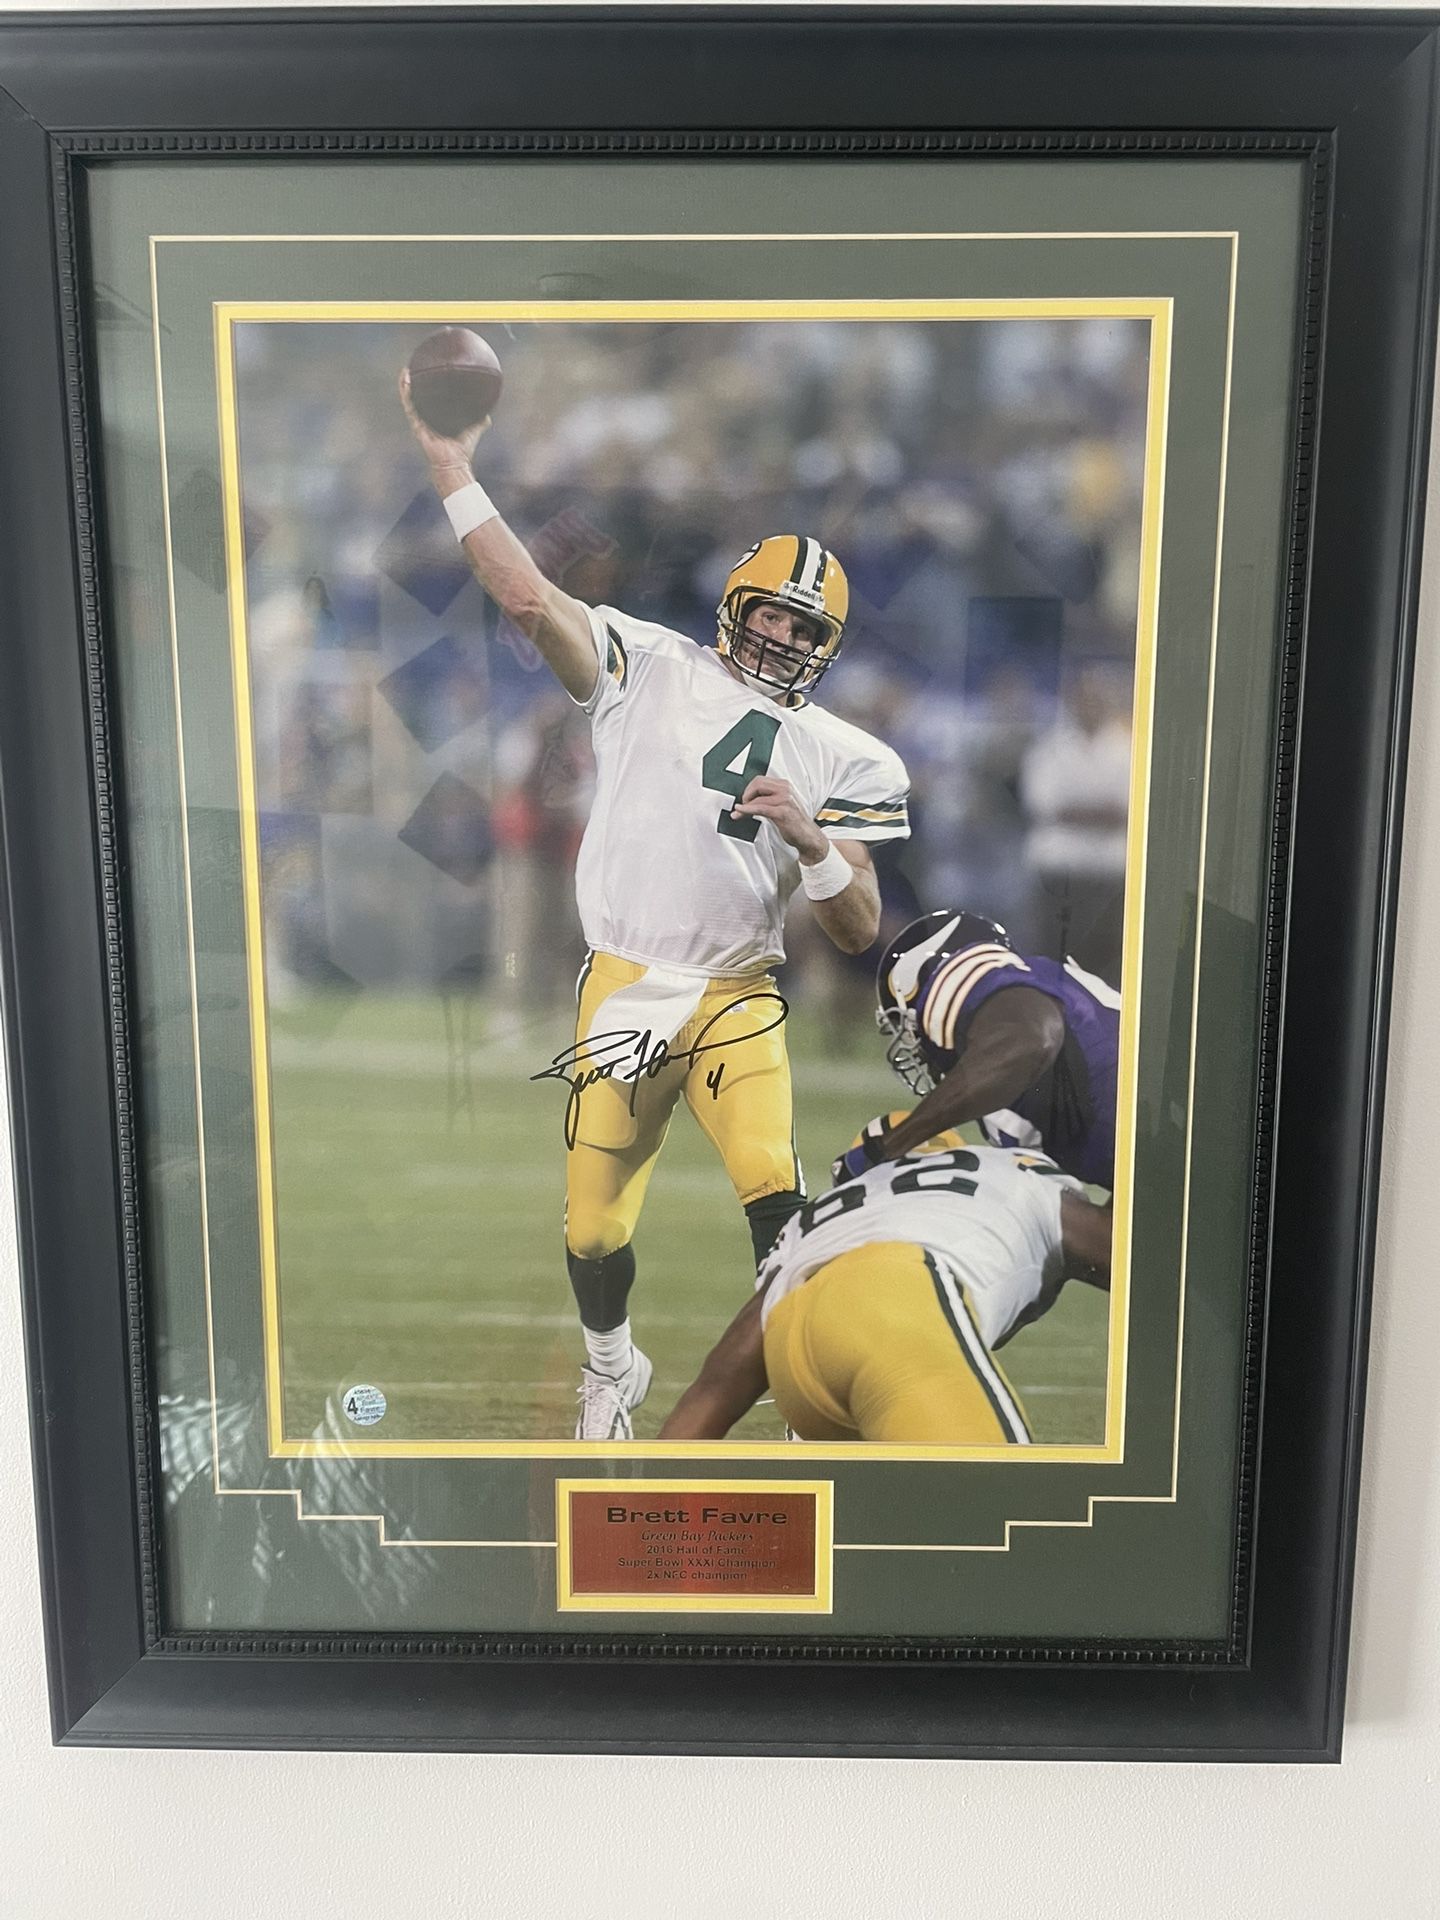 Authentic Signed Autographed, Brett Favre Super Bowl Picture  2016 Hall Of Fame  2x NFC Champion BEST OFFER